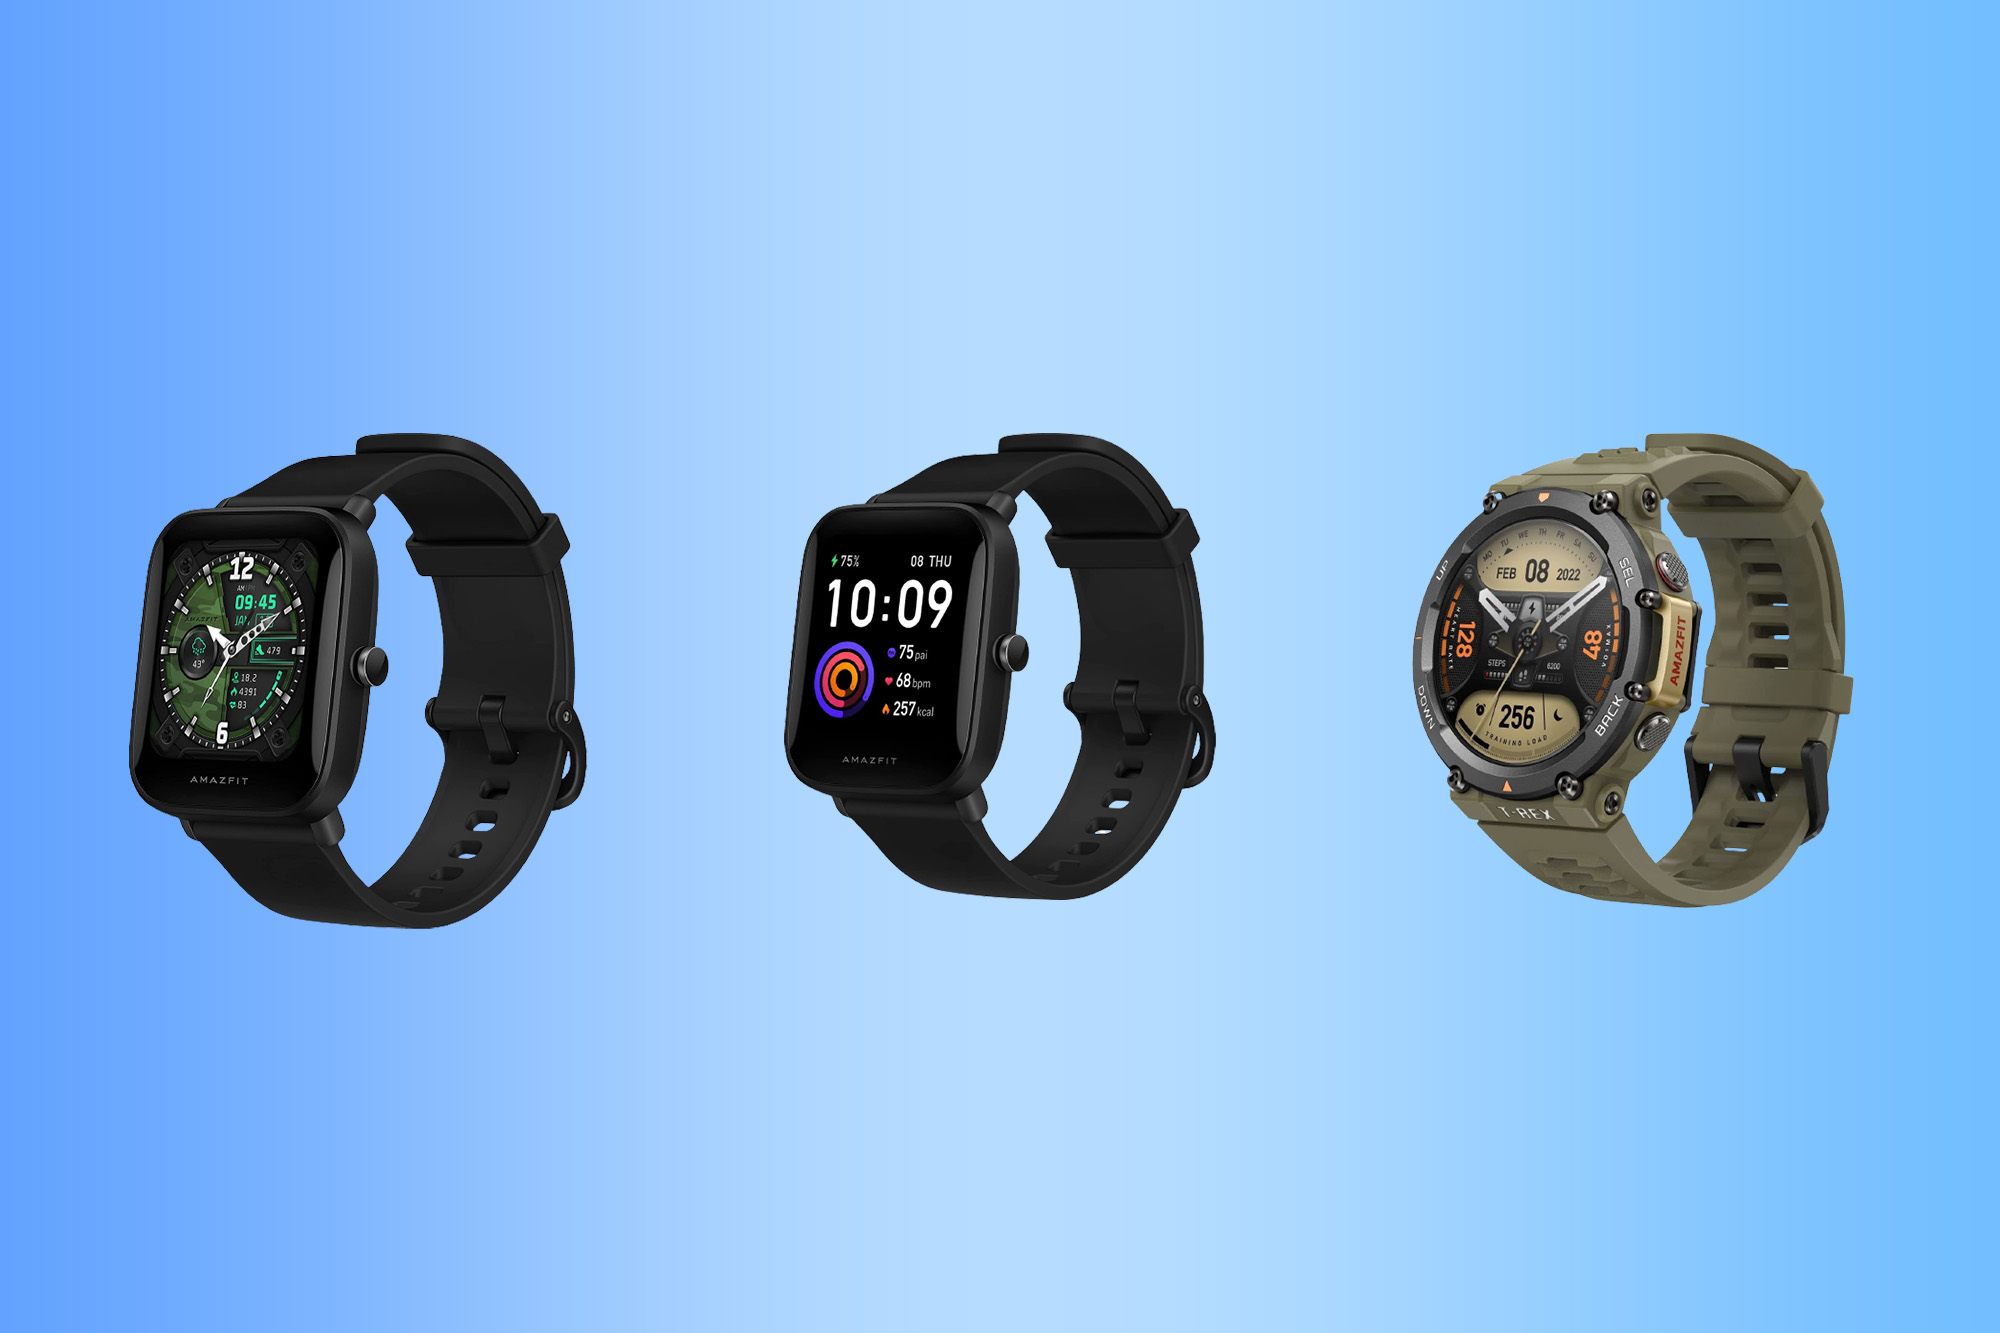 Three smartwatches lined up on a blue gradient background